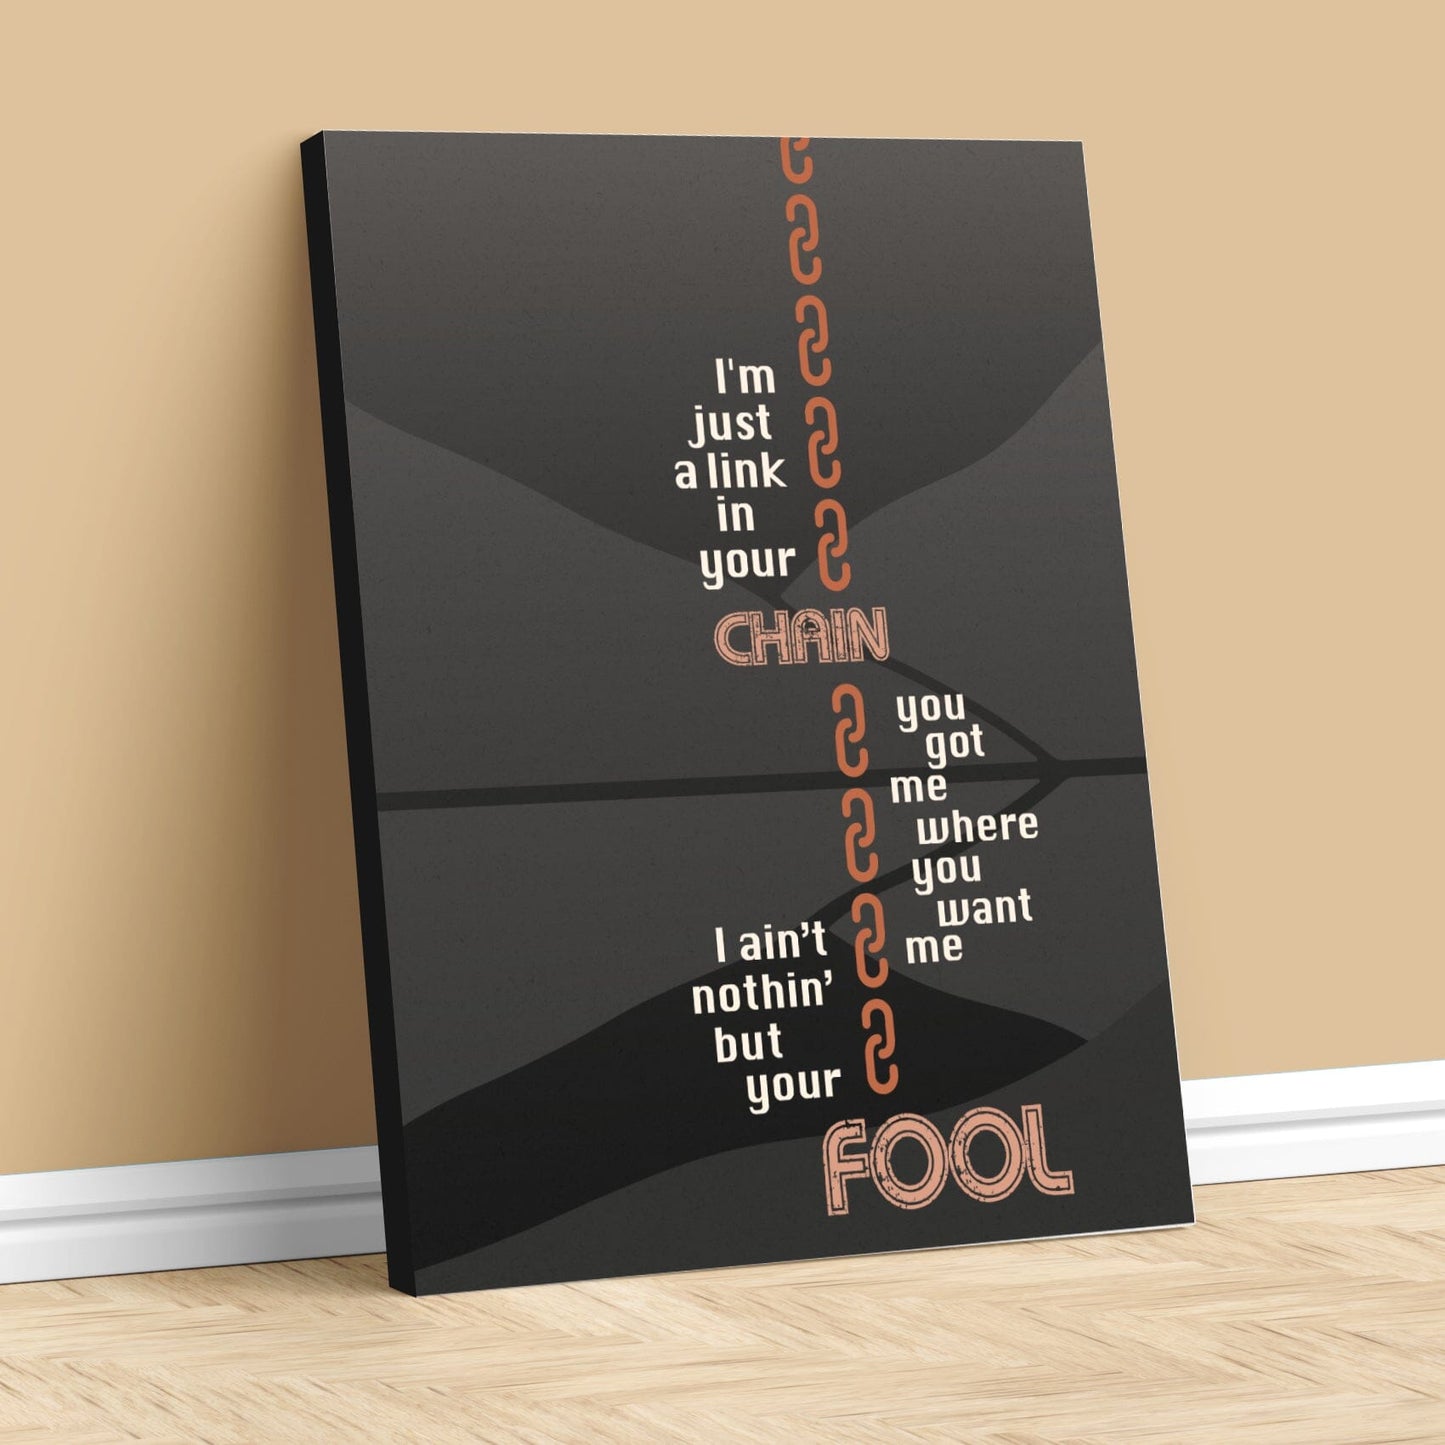 Chain of Fools by Aretha Franklin - Motown Music Lyric Art Song Lyrics Art Song Lyrics Art 11x14 Canvas Wrap 